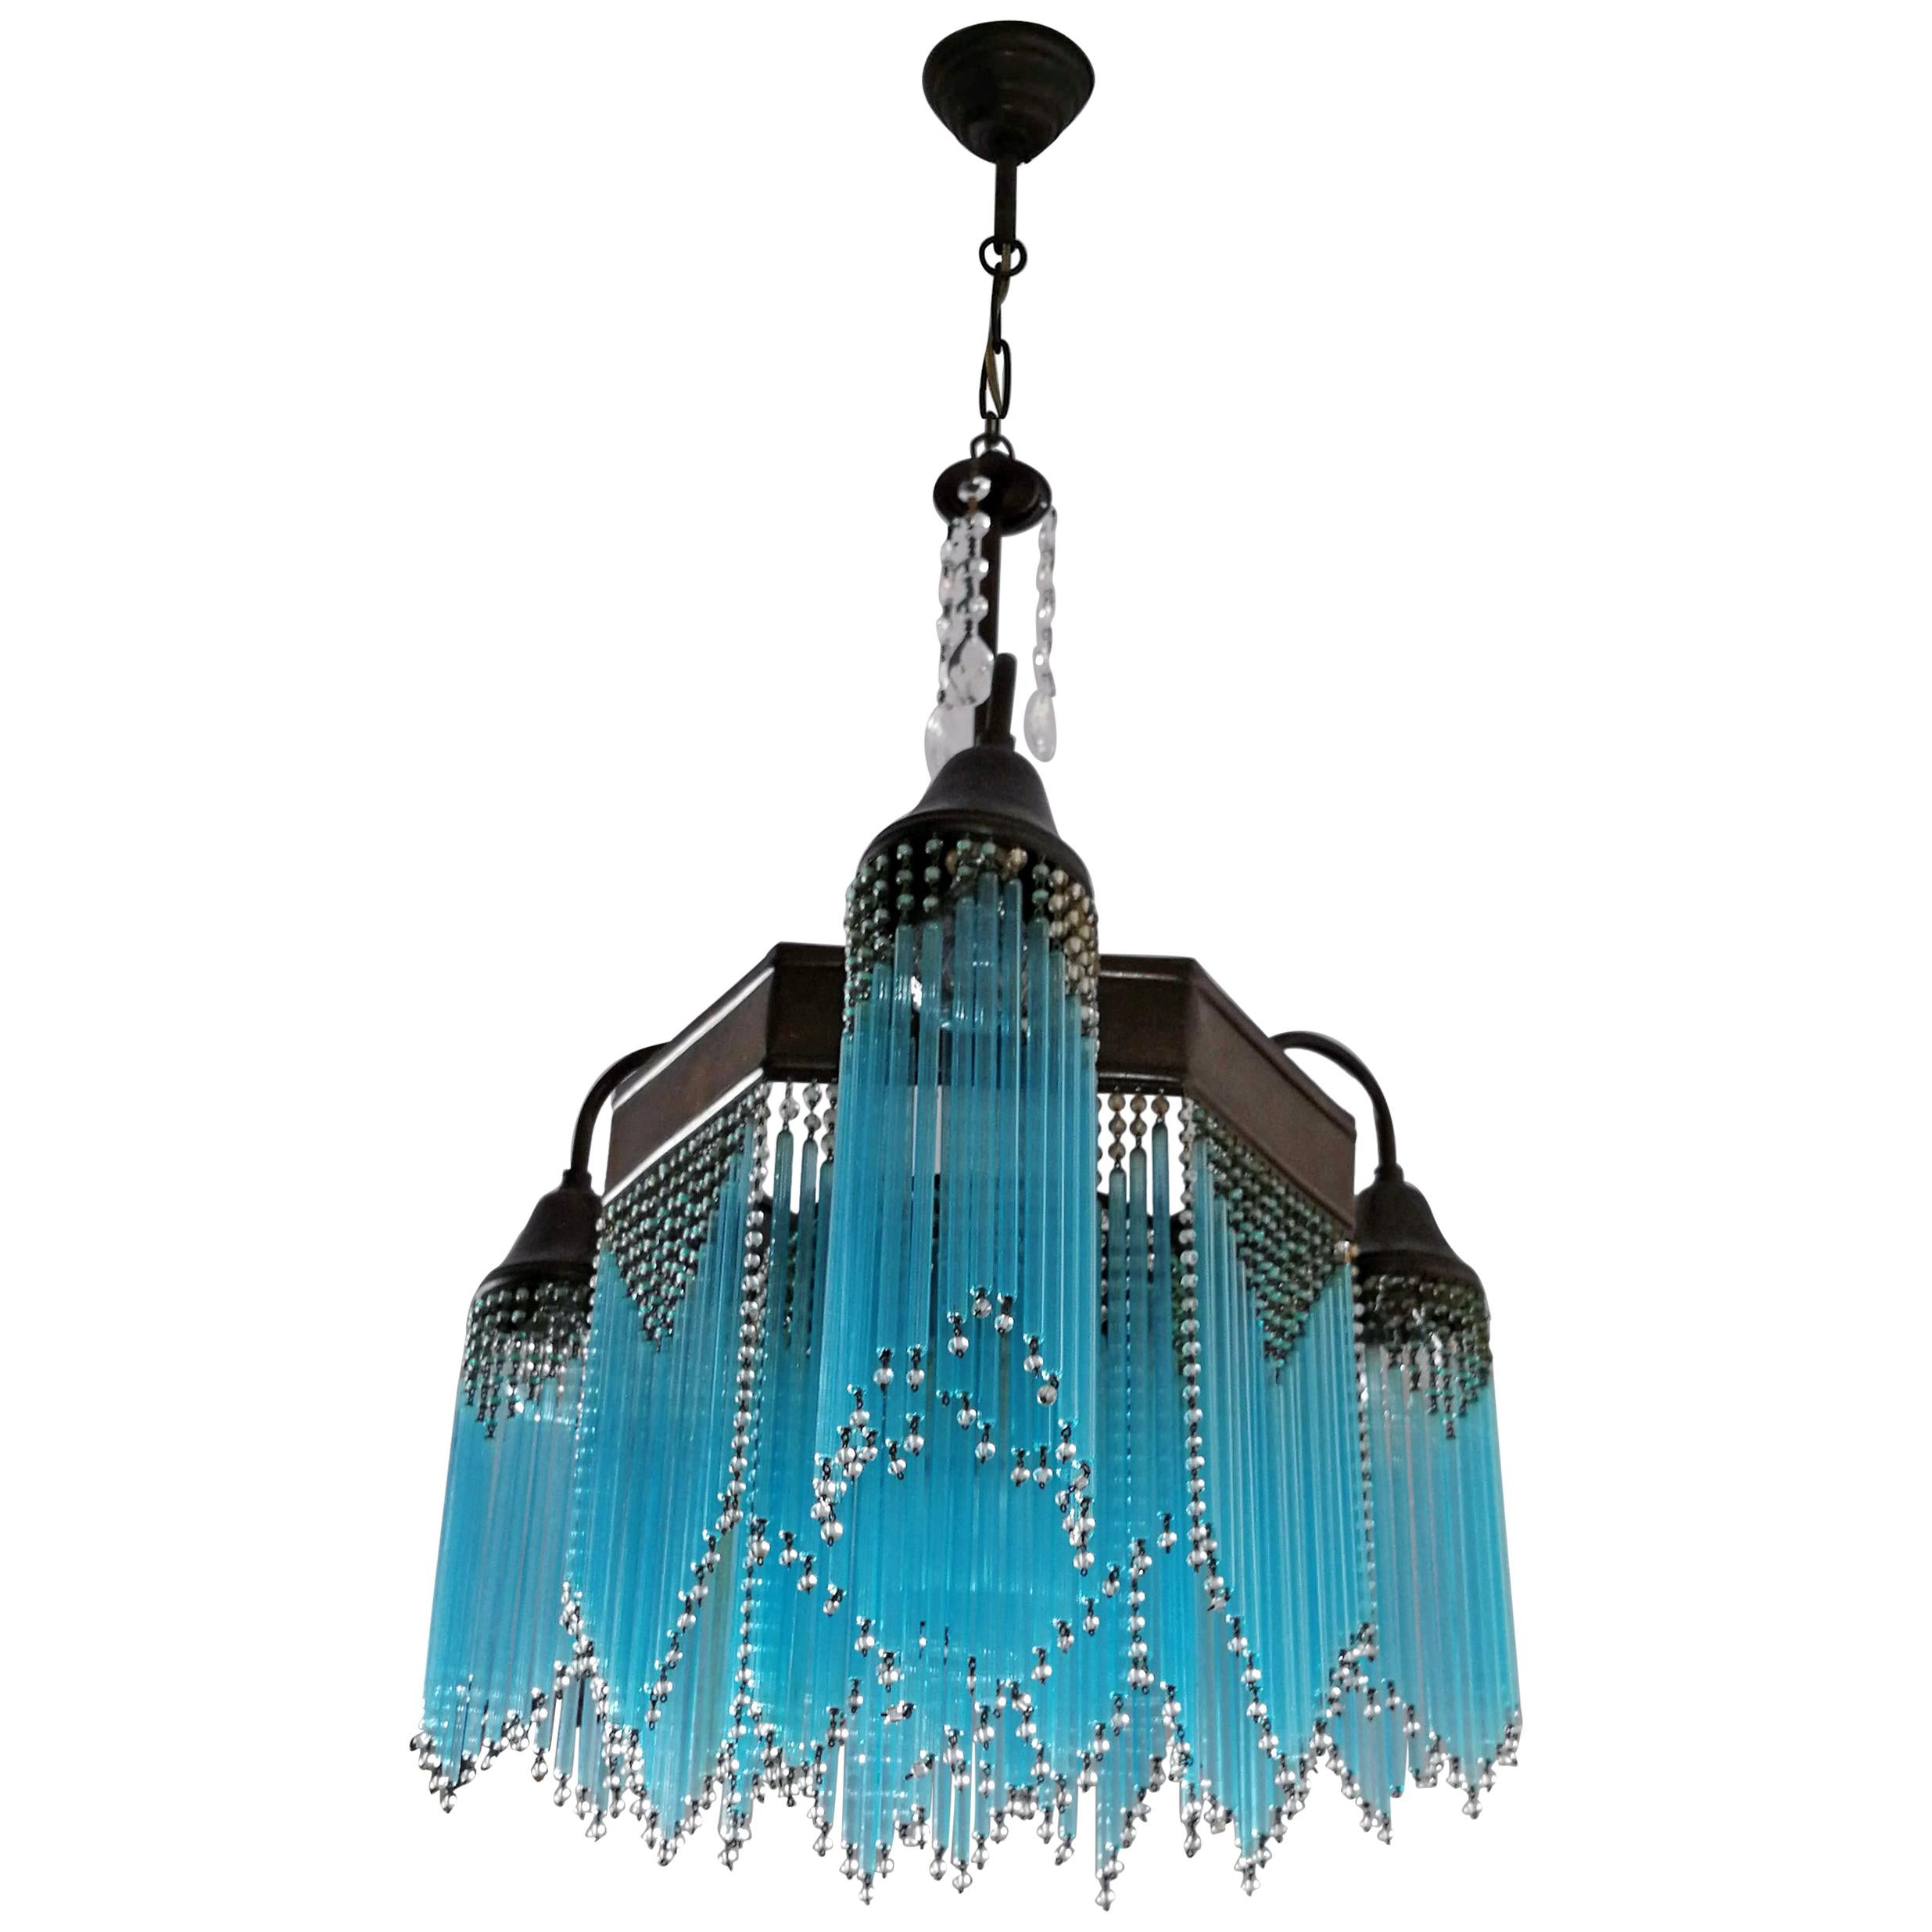 Gorgeous antique French chandelier in turquoise blue beaded glass tubes, Art Deco / Art Nouveau.
Measures:
Diameter 21 in / 53 cm
Height 34.6 in / 88 cm
4-light bulbs E27/ good working condition/European wiring.
Your item will be carefully